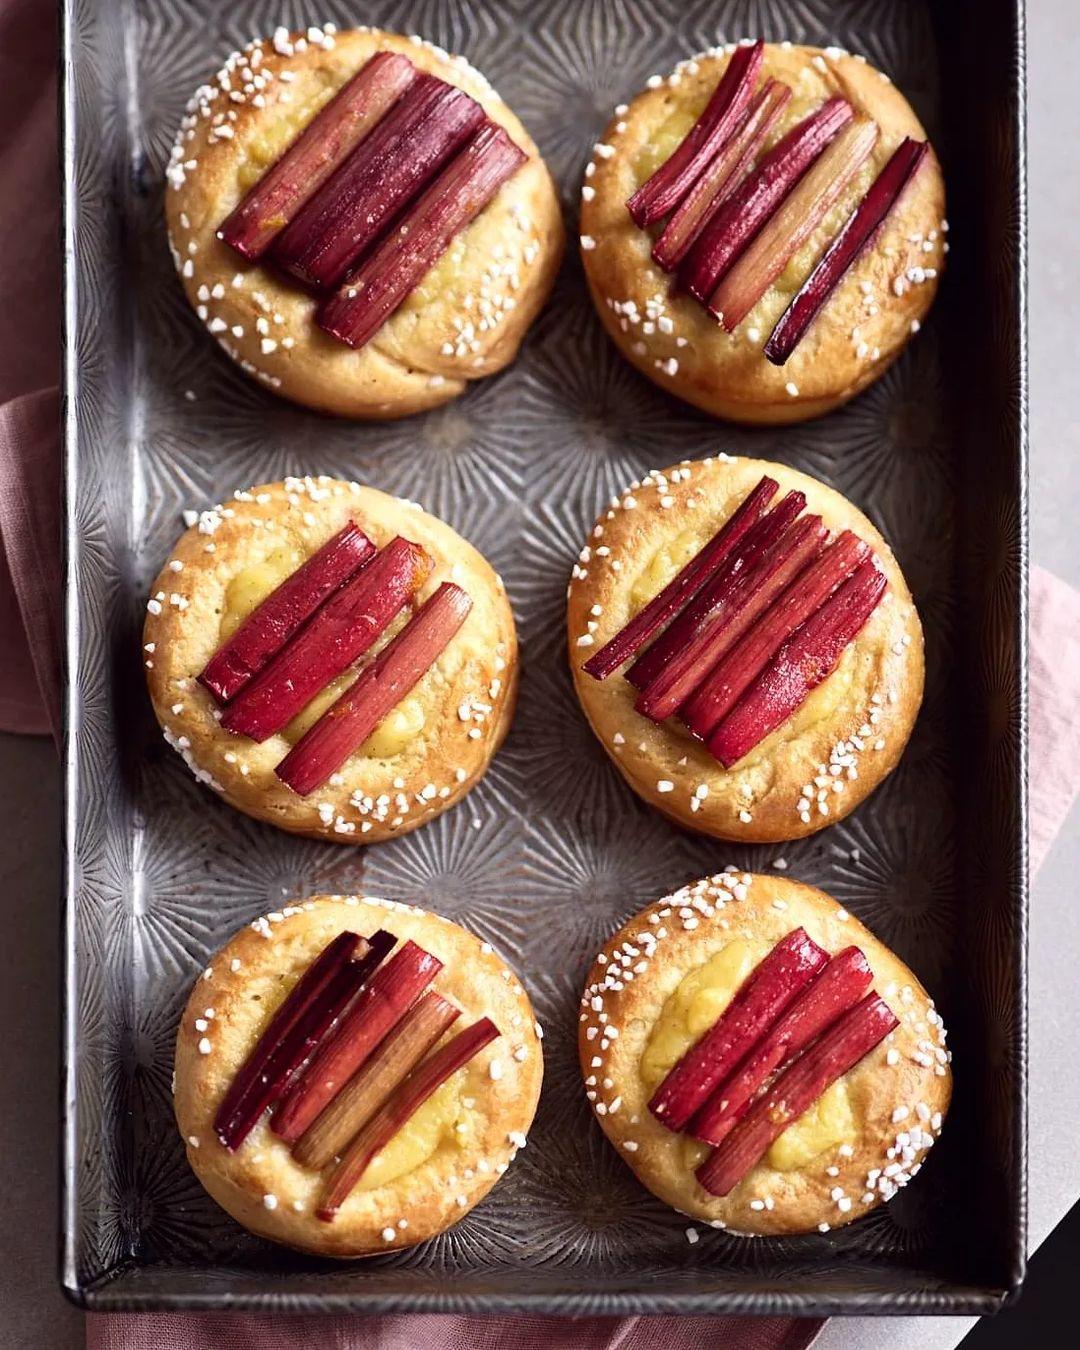 class="content__text"
 A couple of weeks ago @alana__ &amp; @ajax240k gave me some of their home grown rhubarb. I also had dinner rhubarb leftover from Christmas, so I thought it was a great time to try @theboywhobakes 's Rhubarb &amp; Custard Brioche tarts 🤤 
 